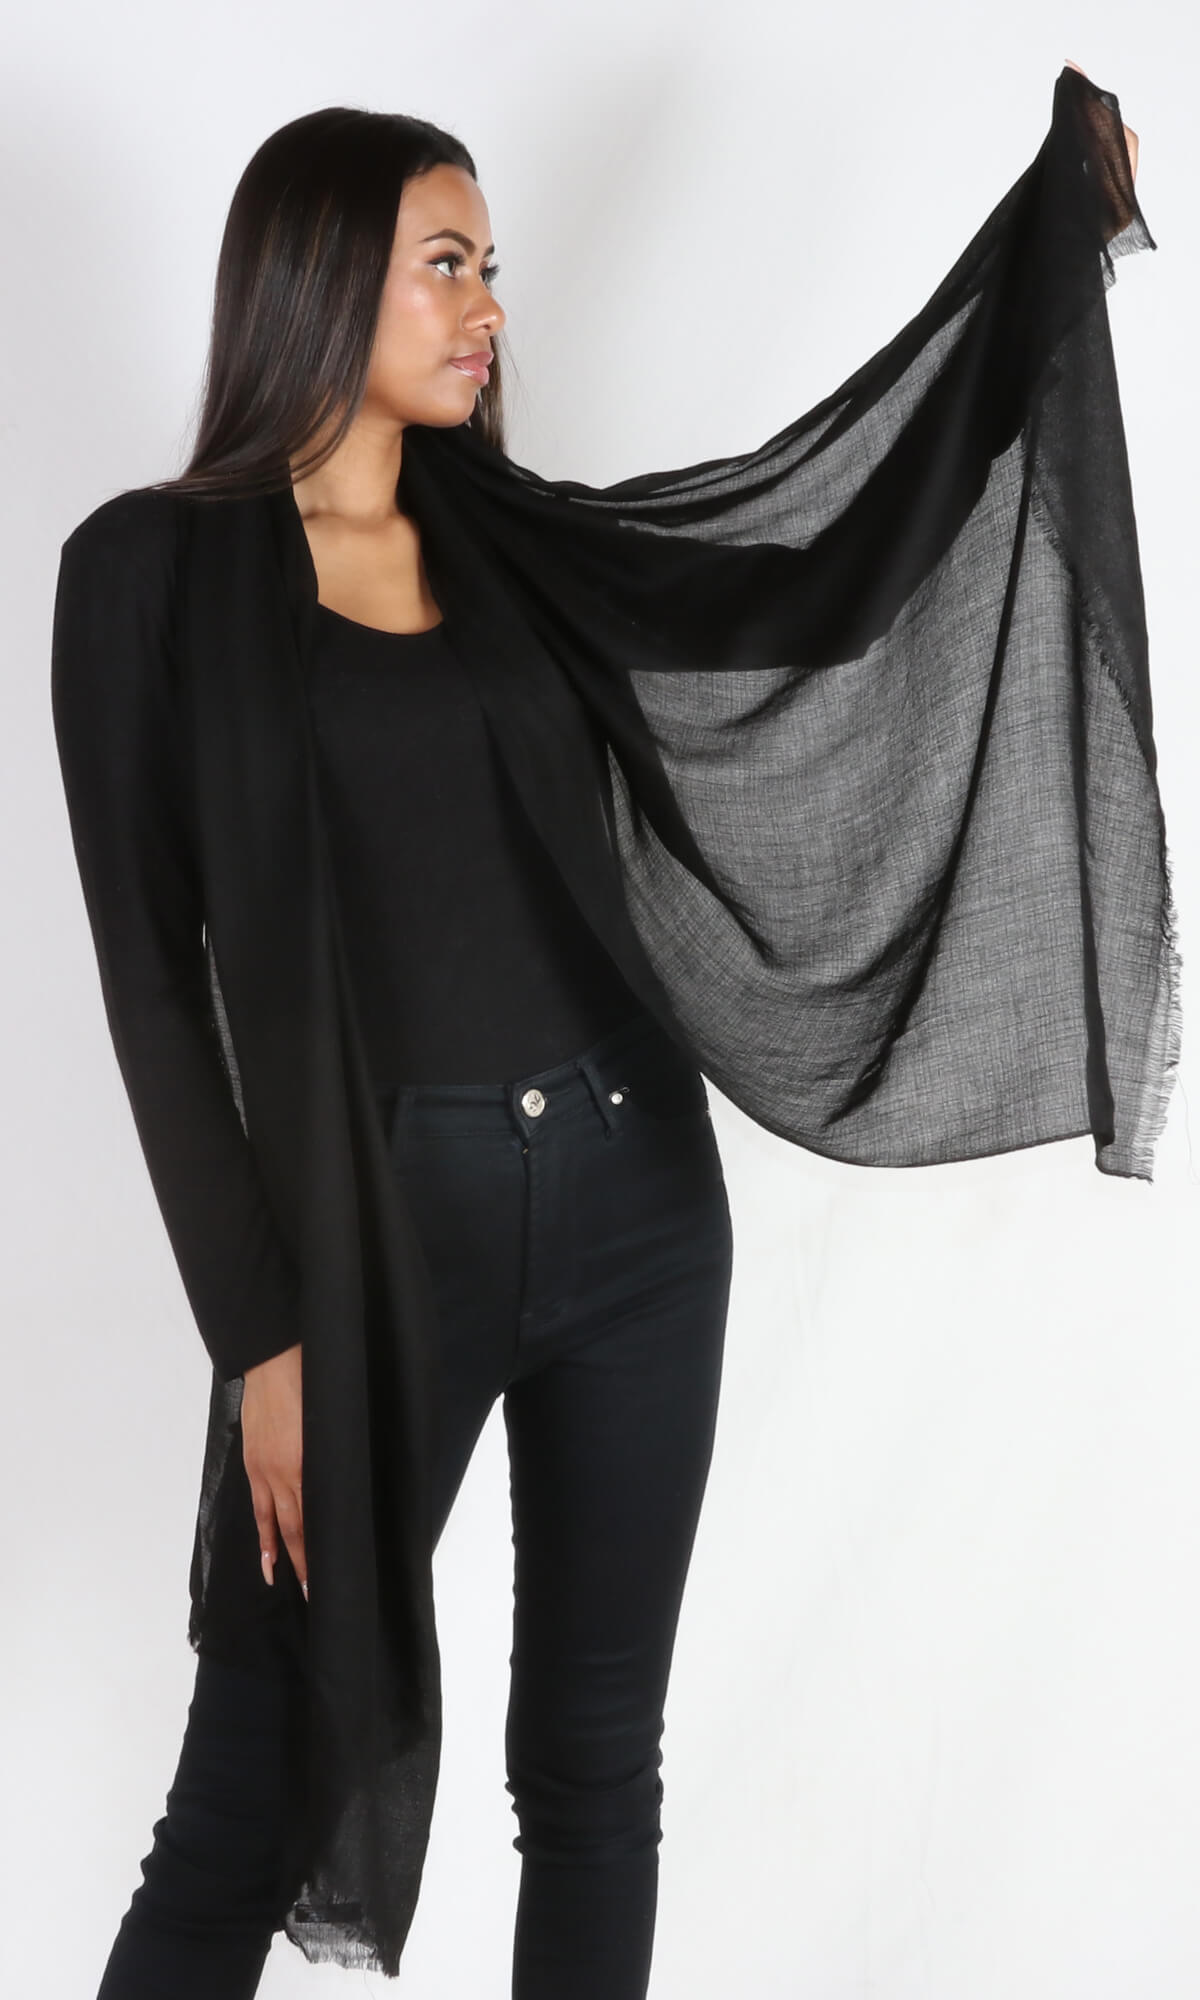 A 5ft 8 inches tall female model drapes a 100% pure handmade black cashmere shawl around her neck. She picks one edge of the shawls to show lightweight and transparent properties.